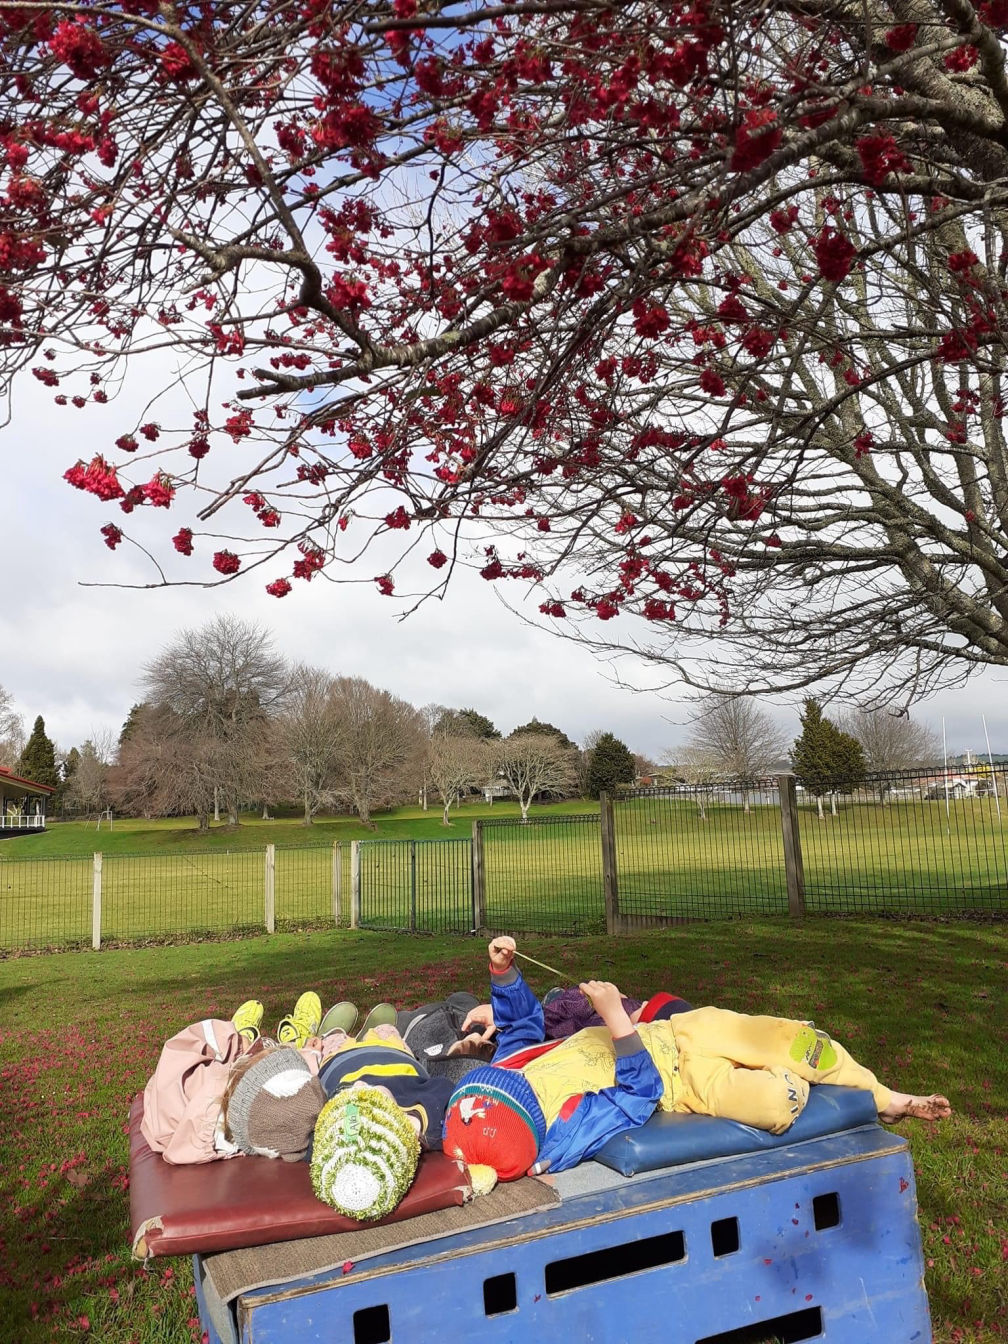 Children laid looking up at a tree